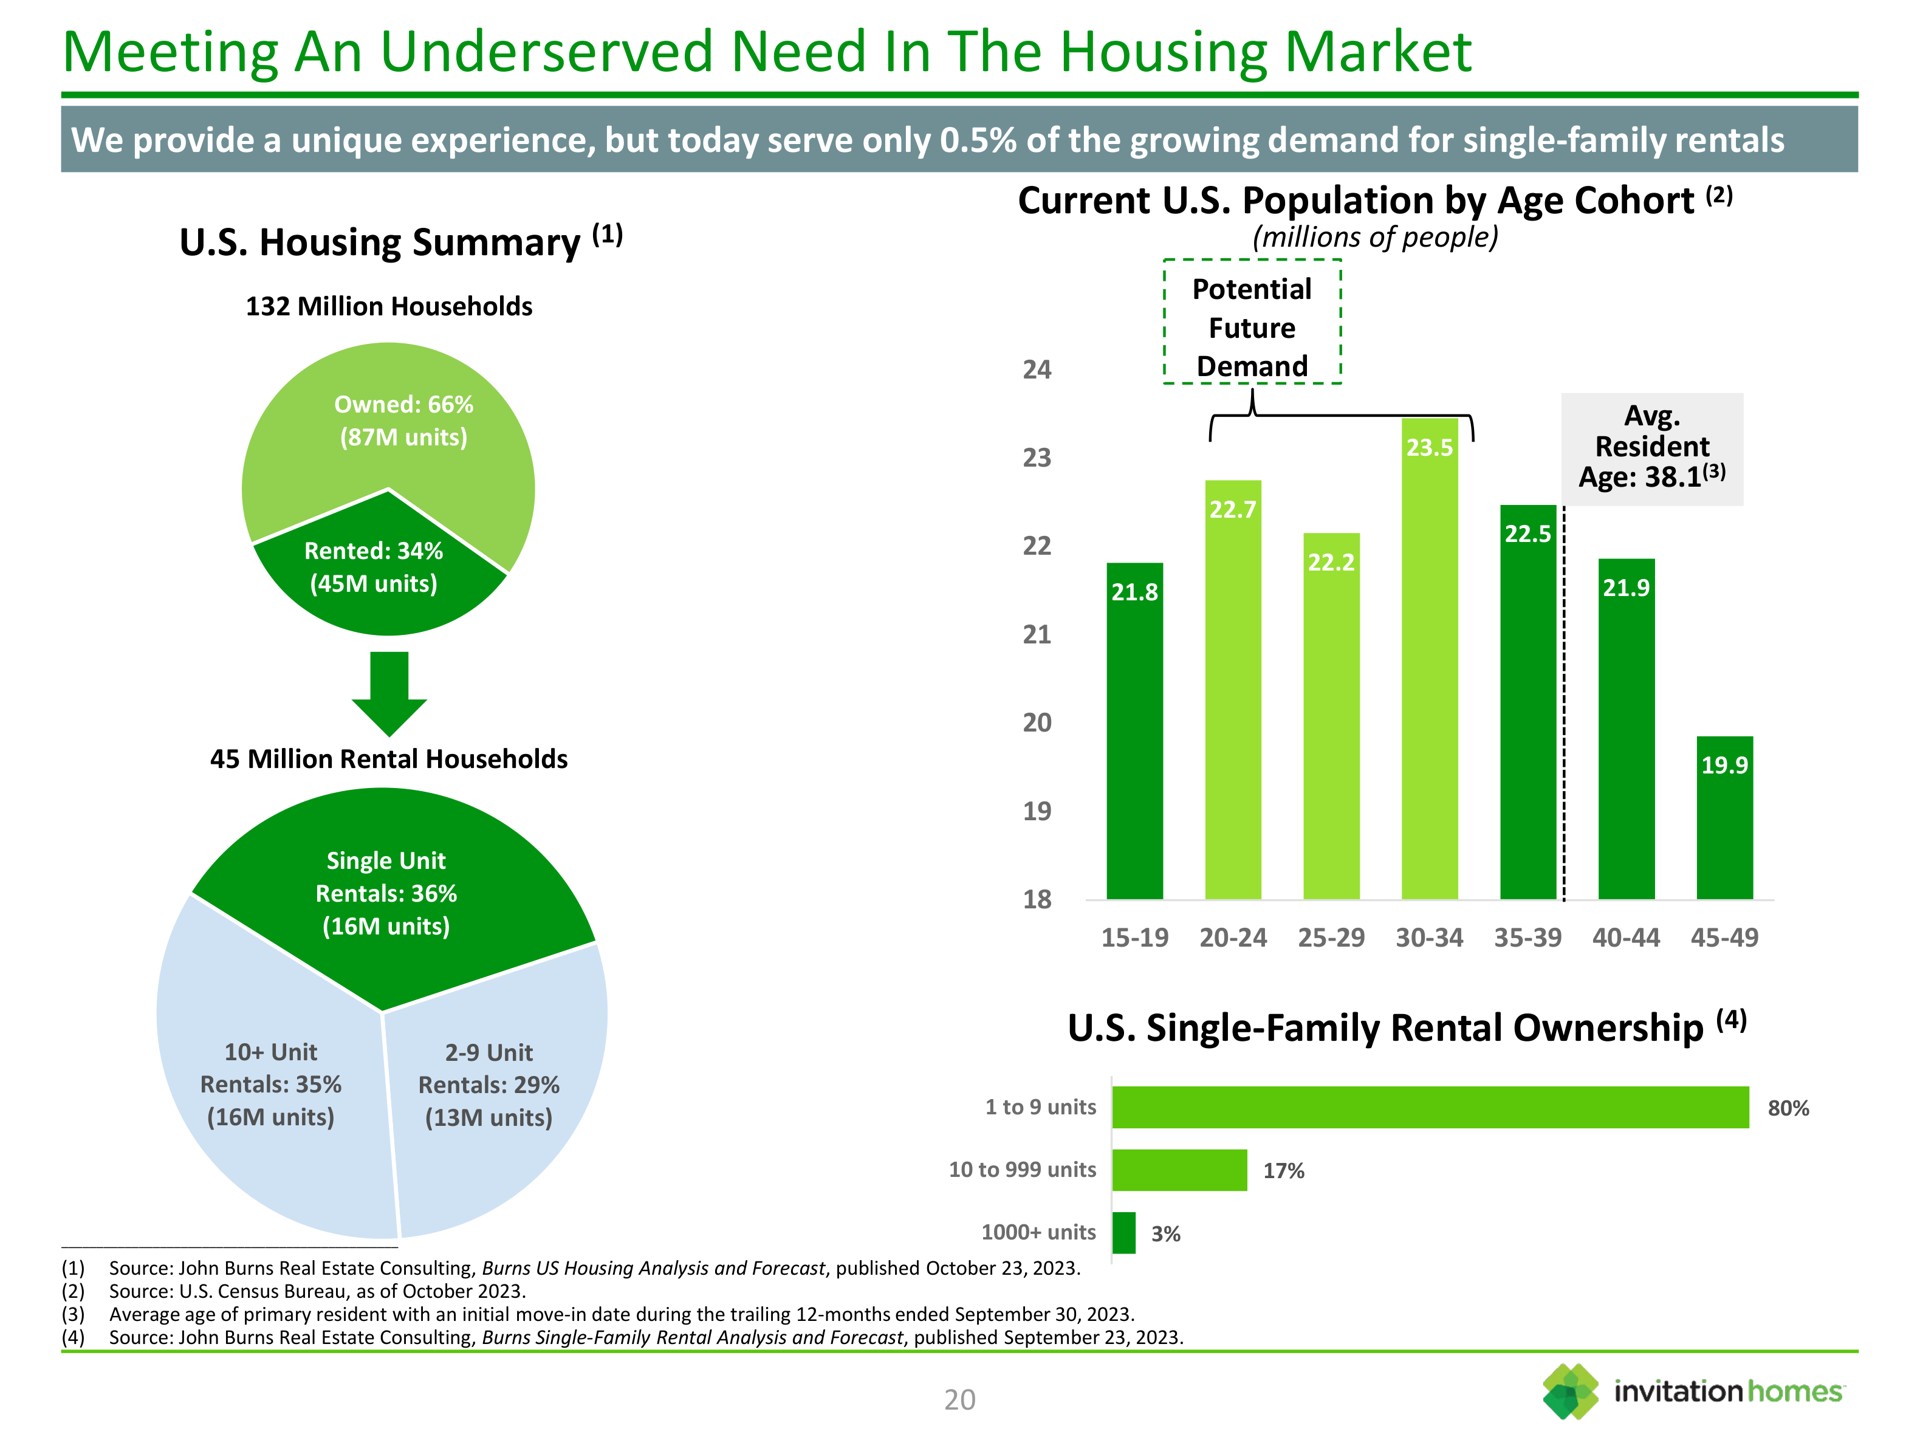 meeting an need in the housing market housing summary current population by age cohort single family rental ownership demand | Invitation Homes